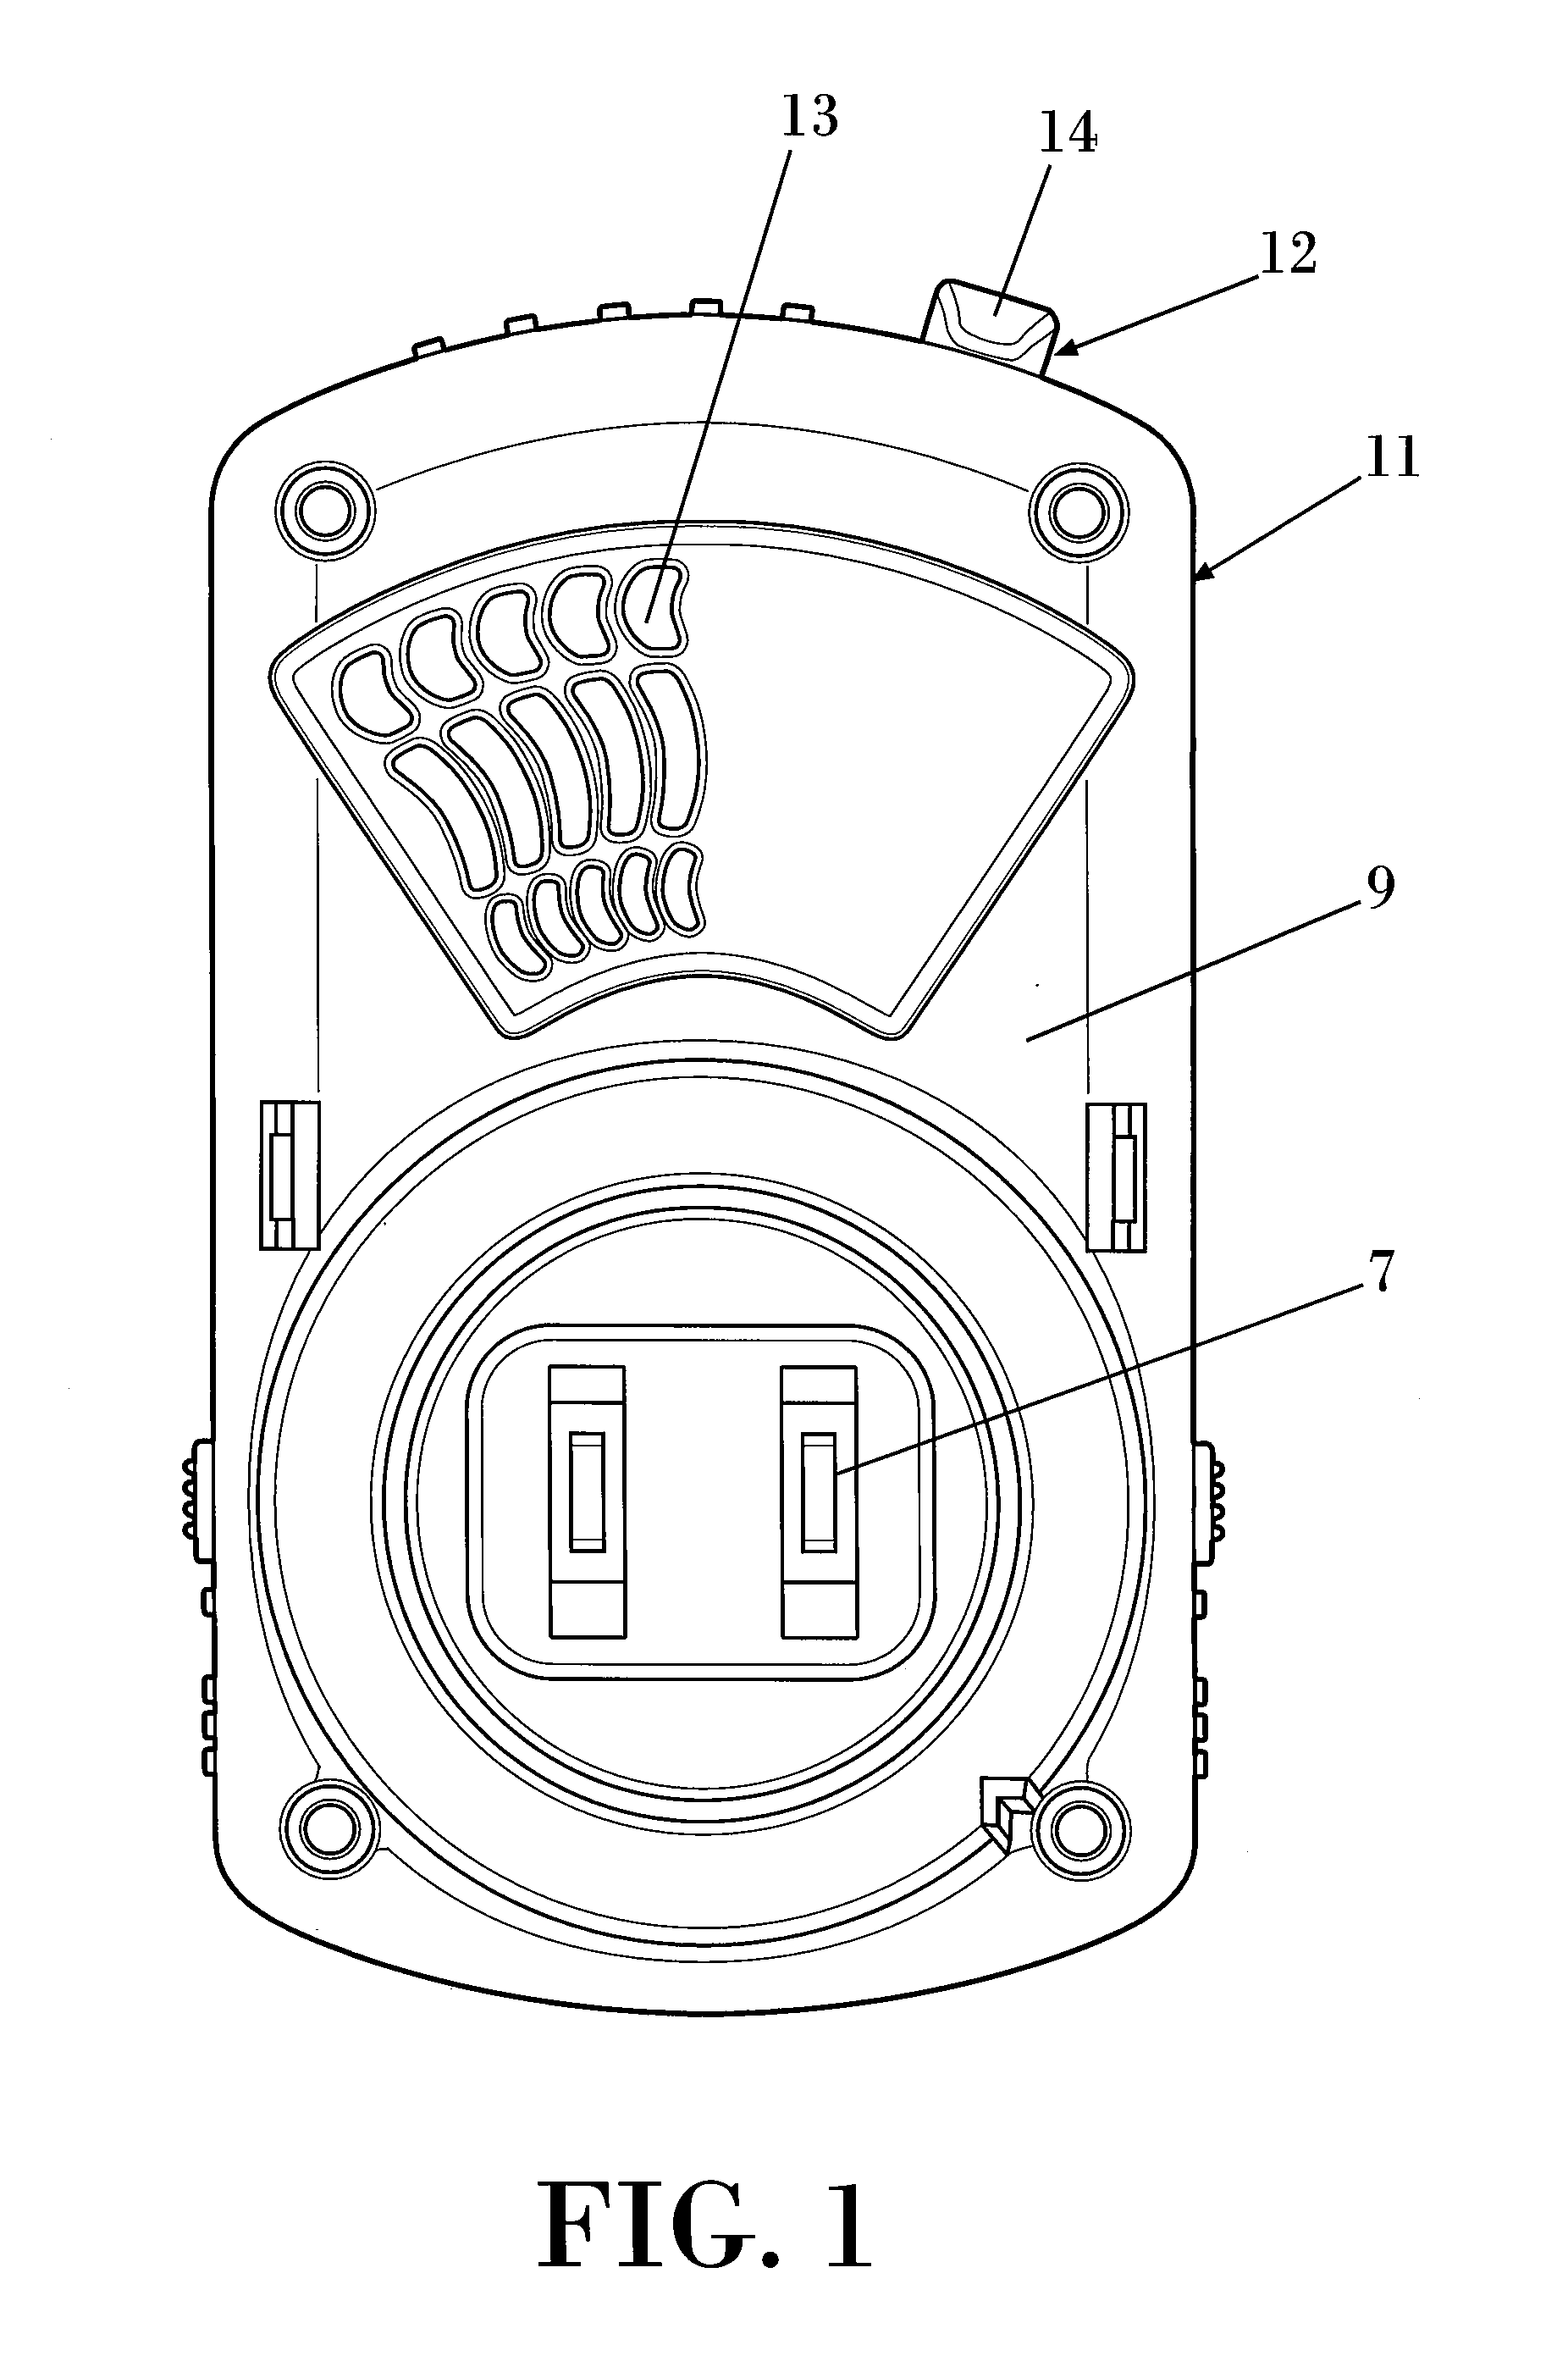 Electric evaporator device of volatile substances with adjustable evaporation intensity